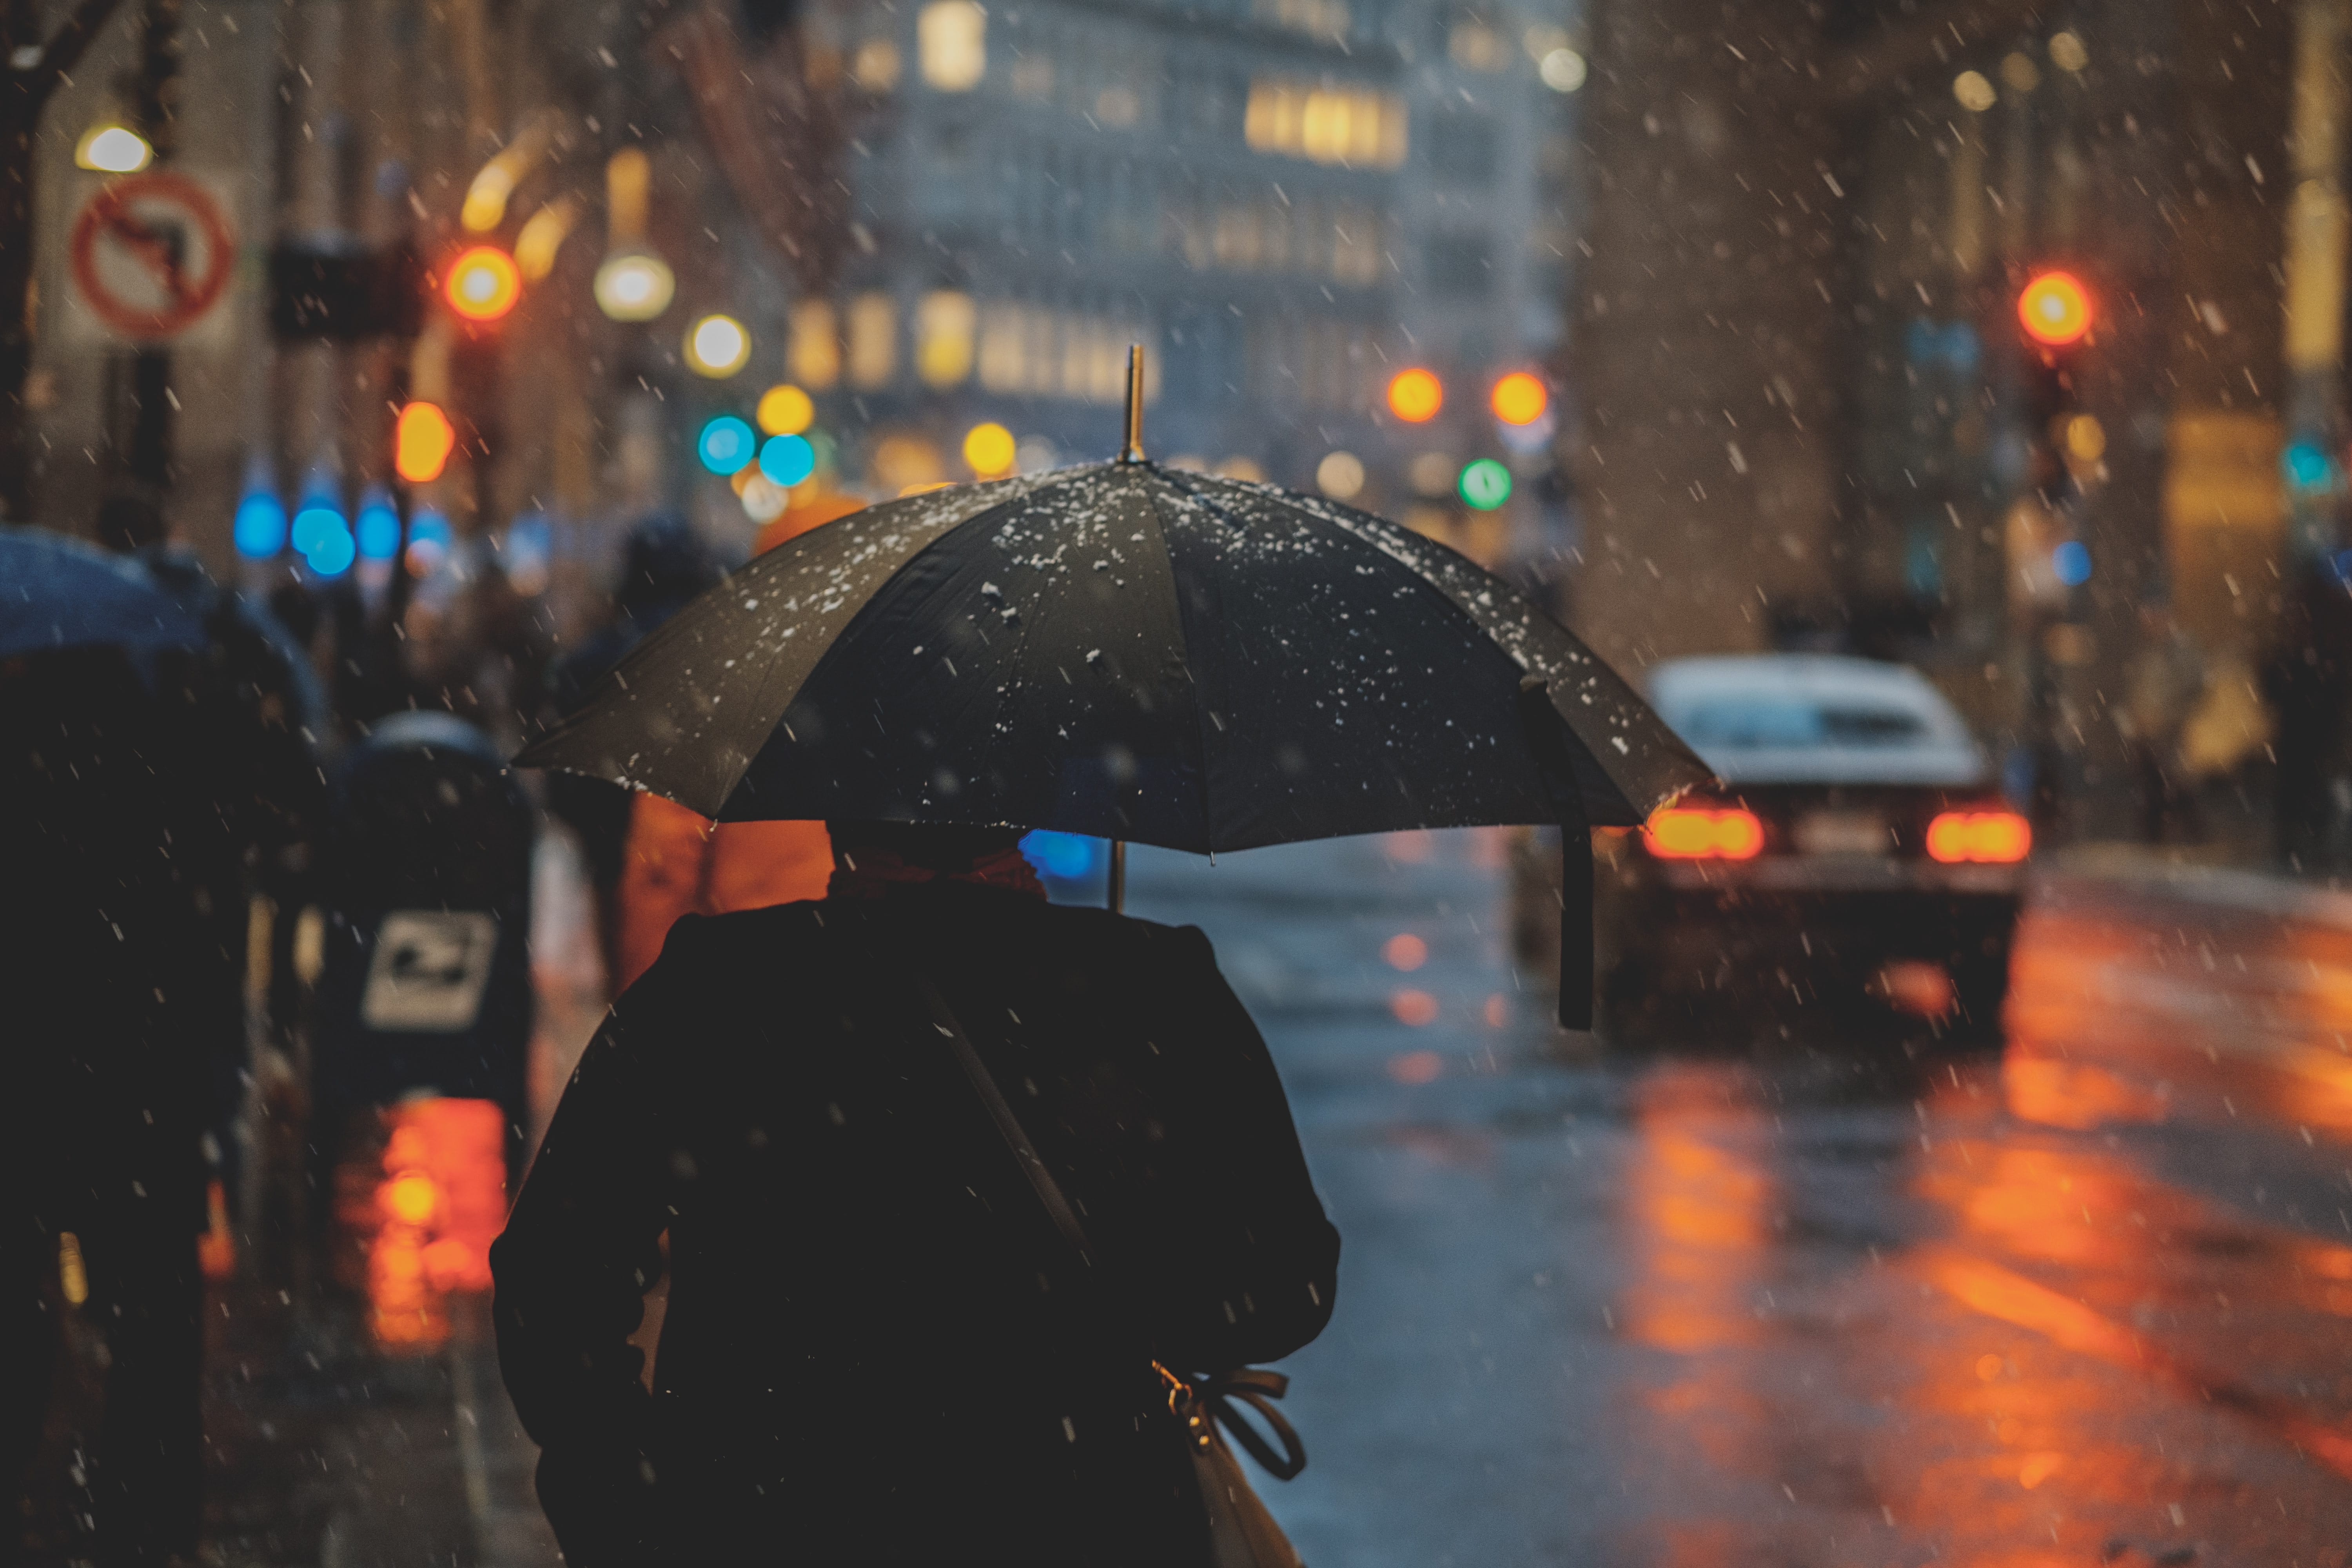 A person walks with an umbrella in a rainy city